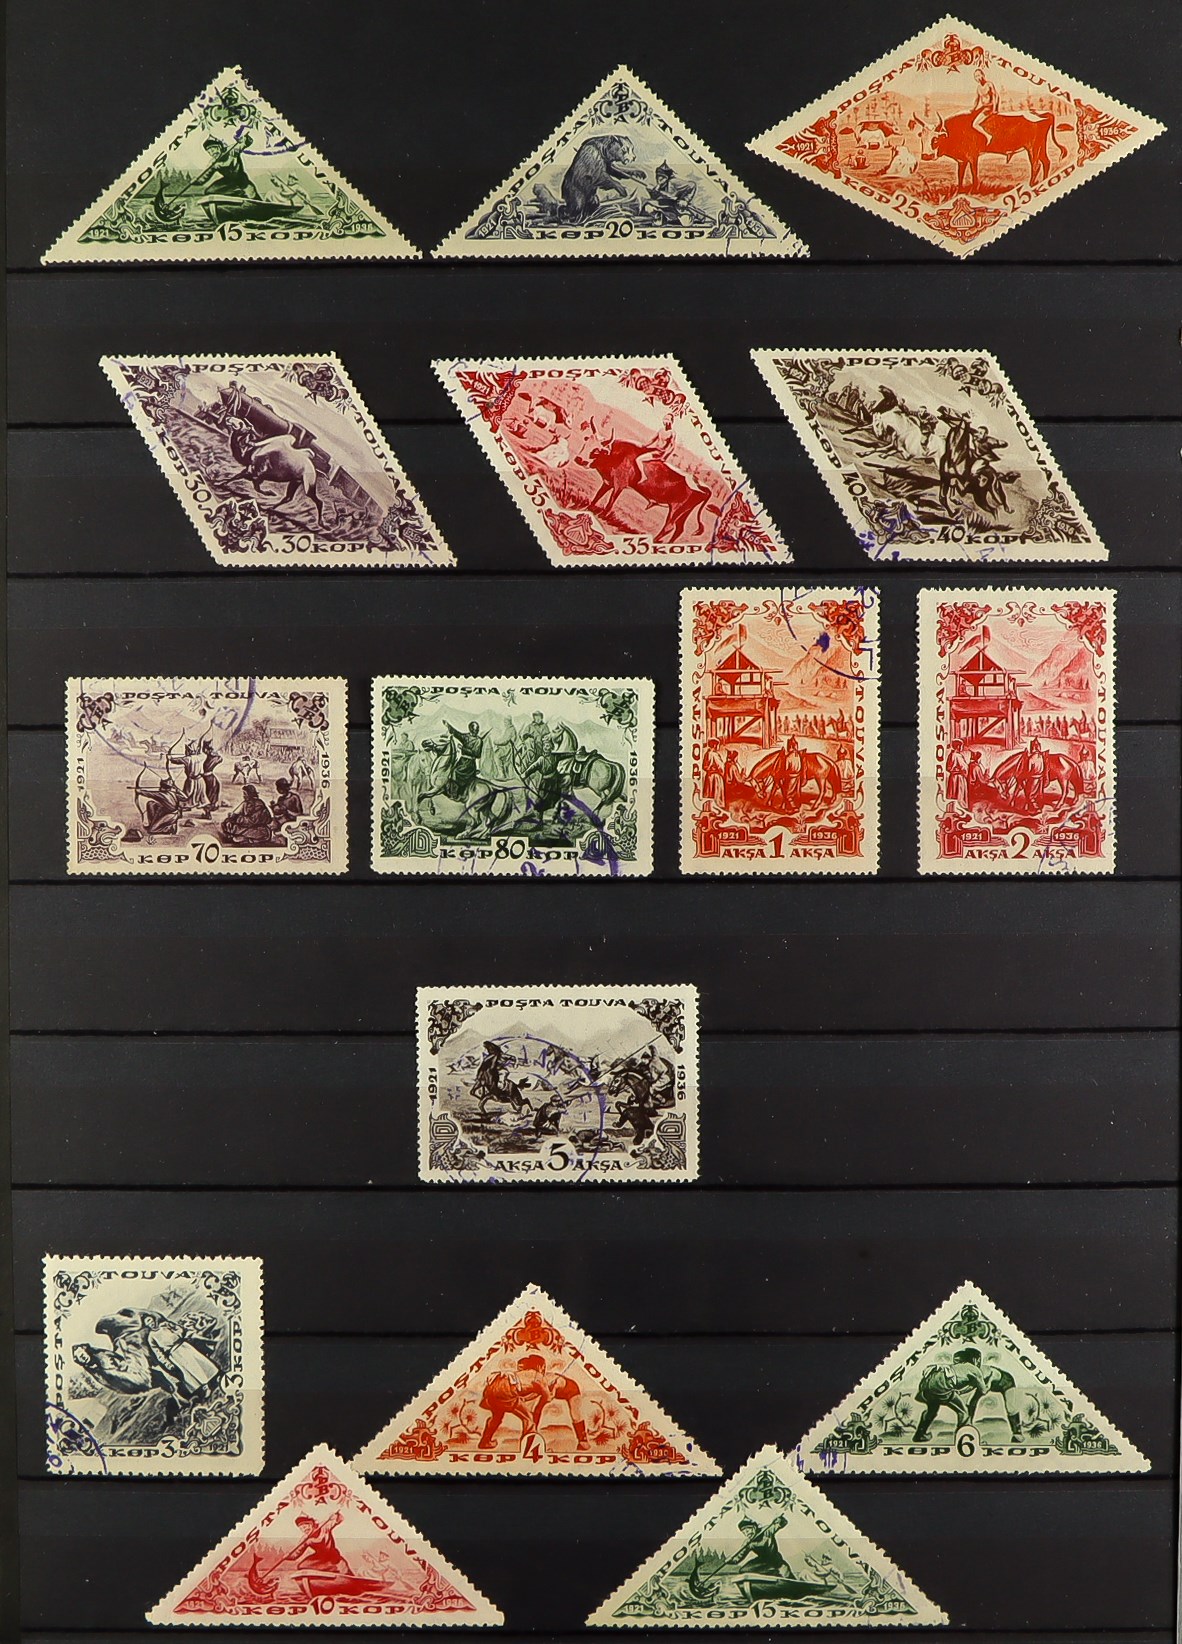 TUVA 1926 - 1995 DEALERS STOCK on various protective pages, with over 1500 mint / never hinged - Image 6 of 14